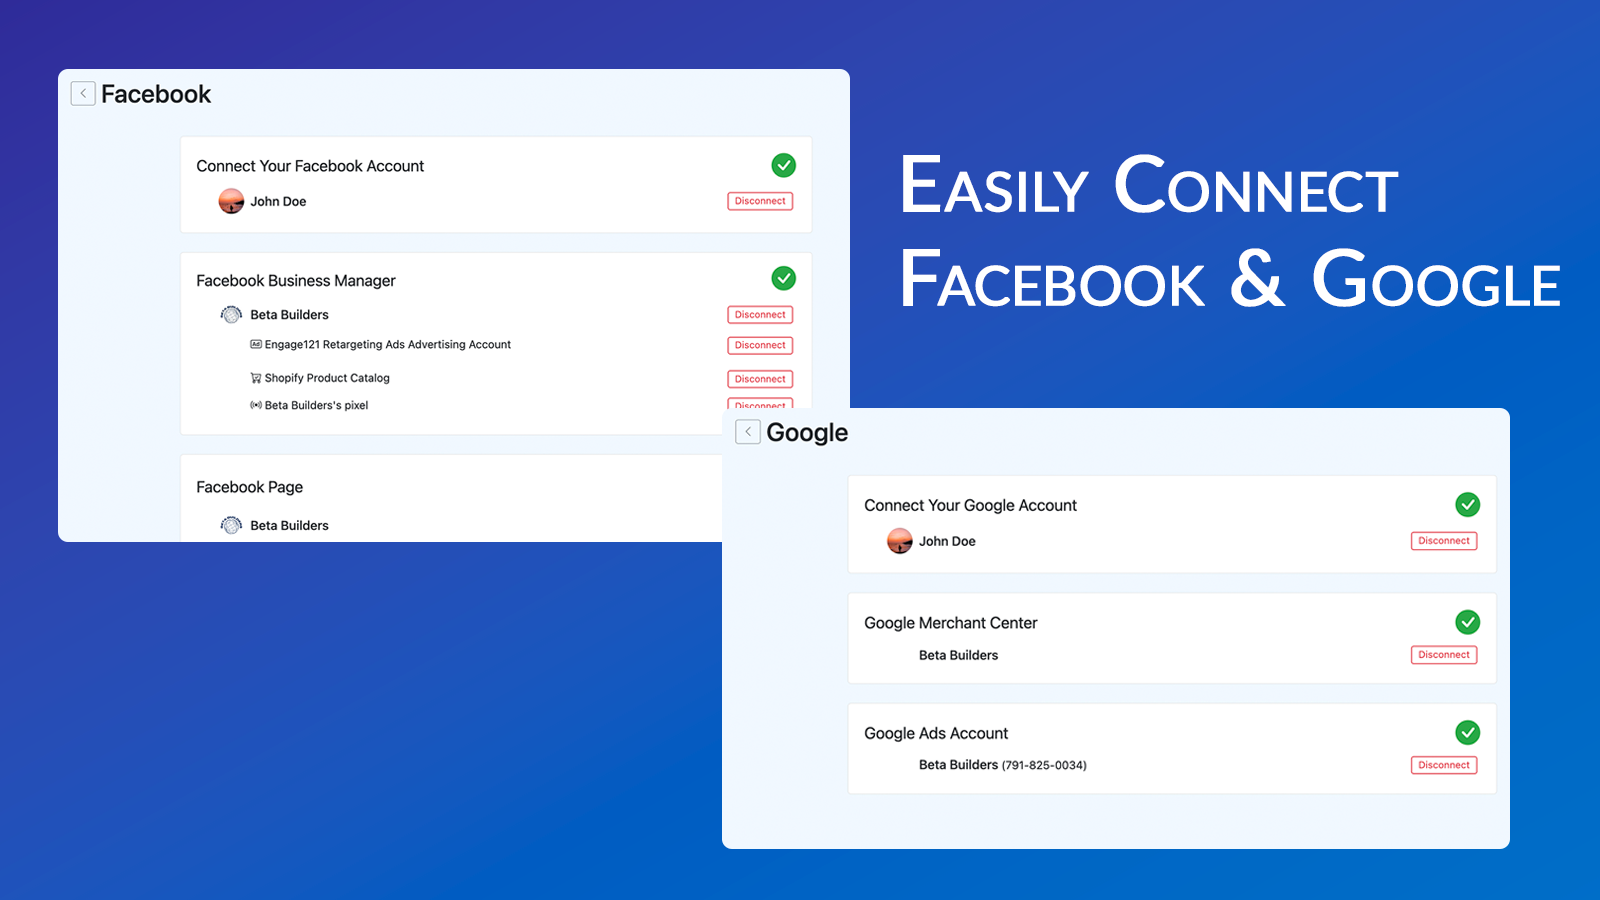 Easily Connect & Manage Both Facebook & Google